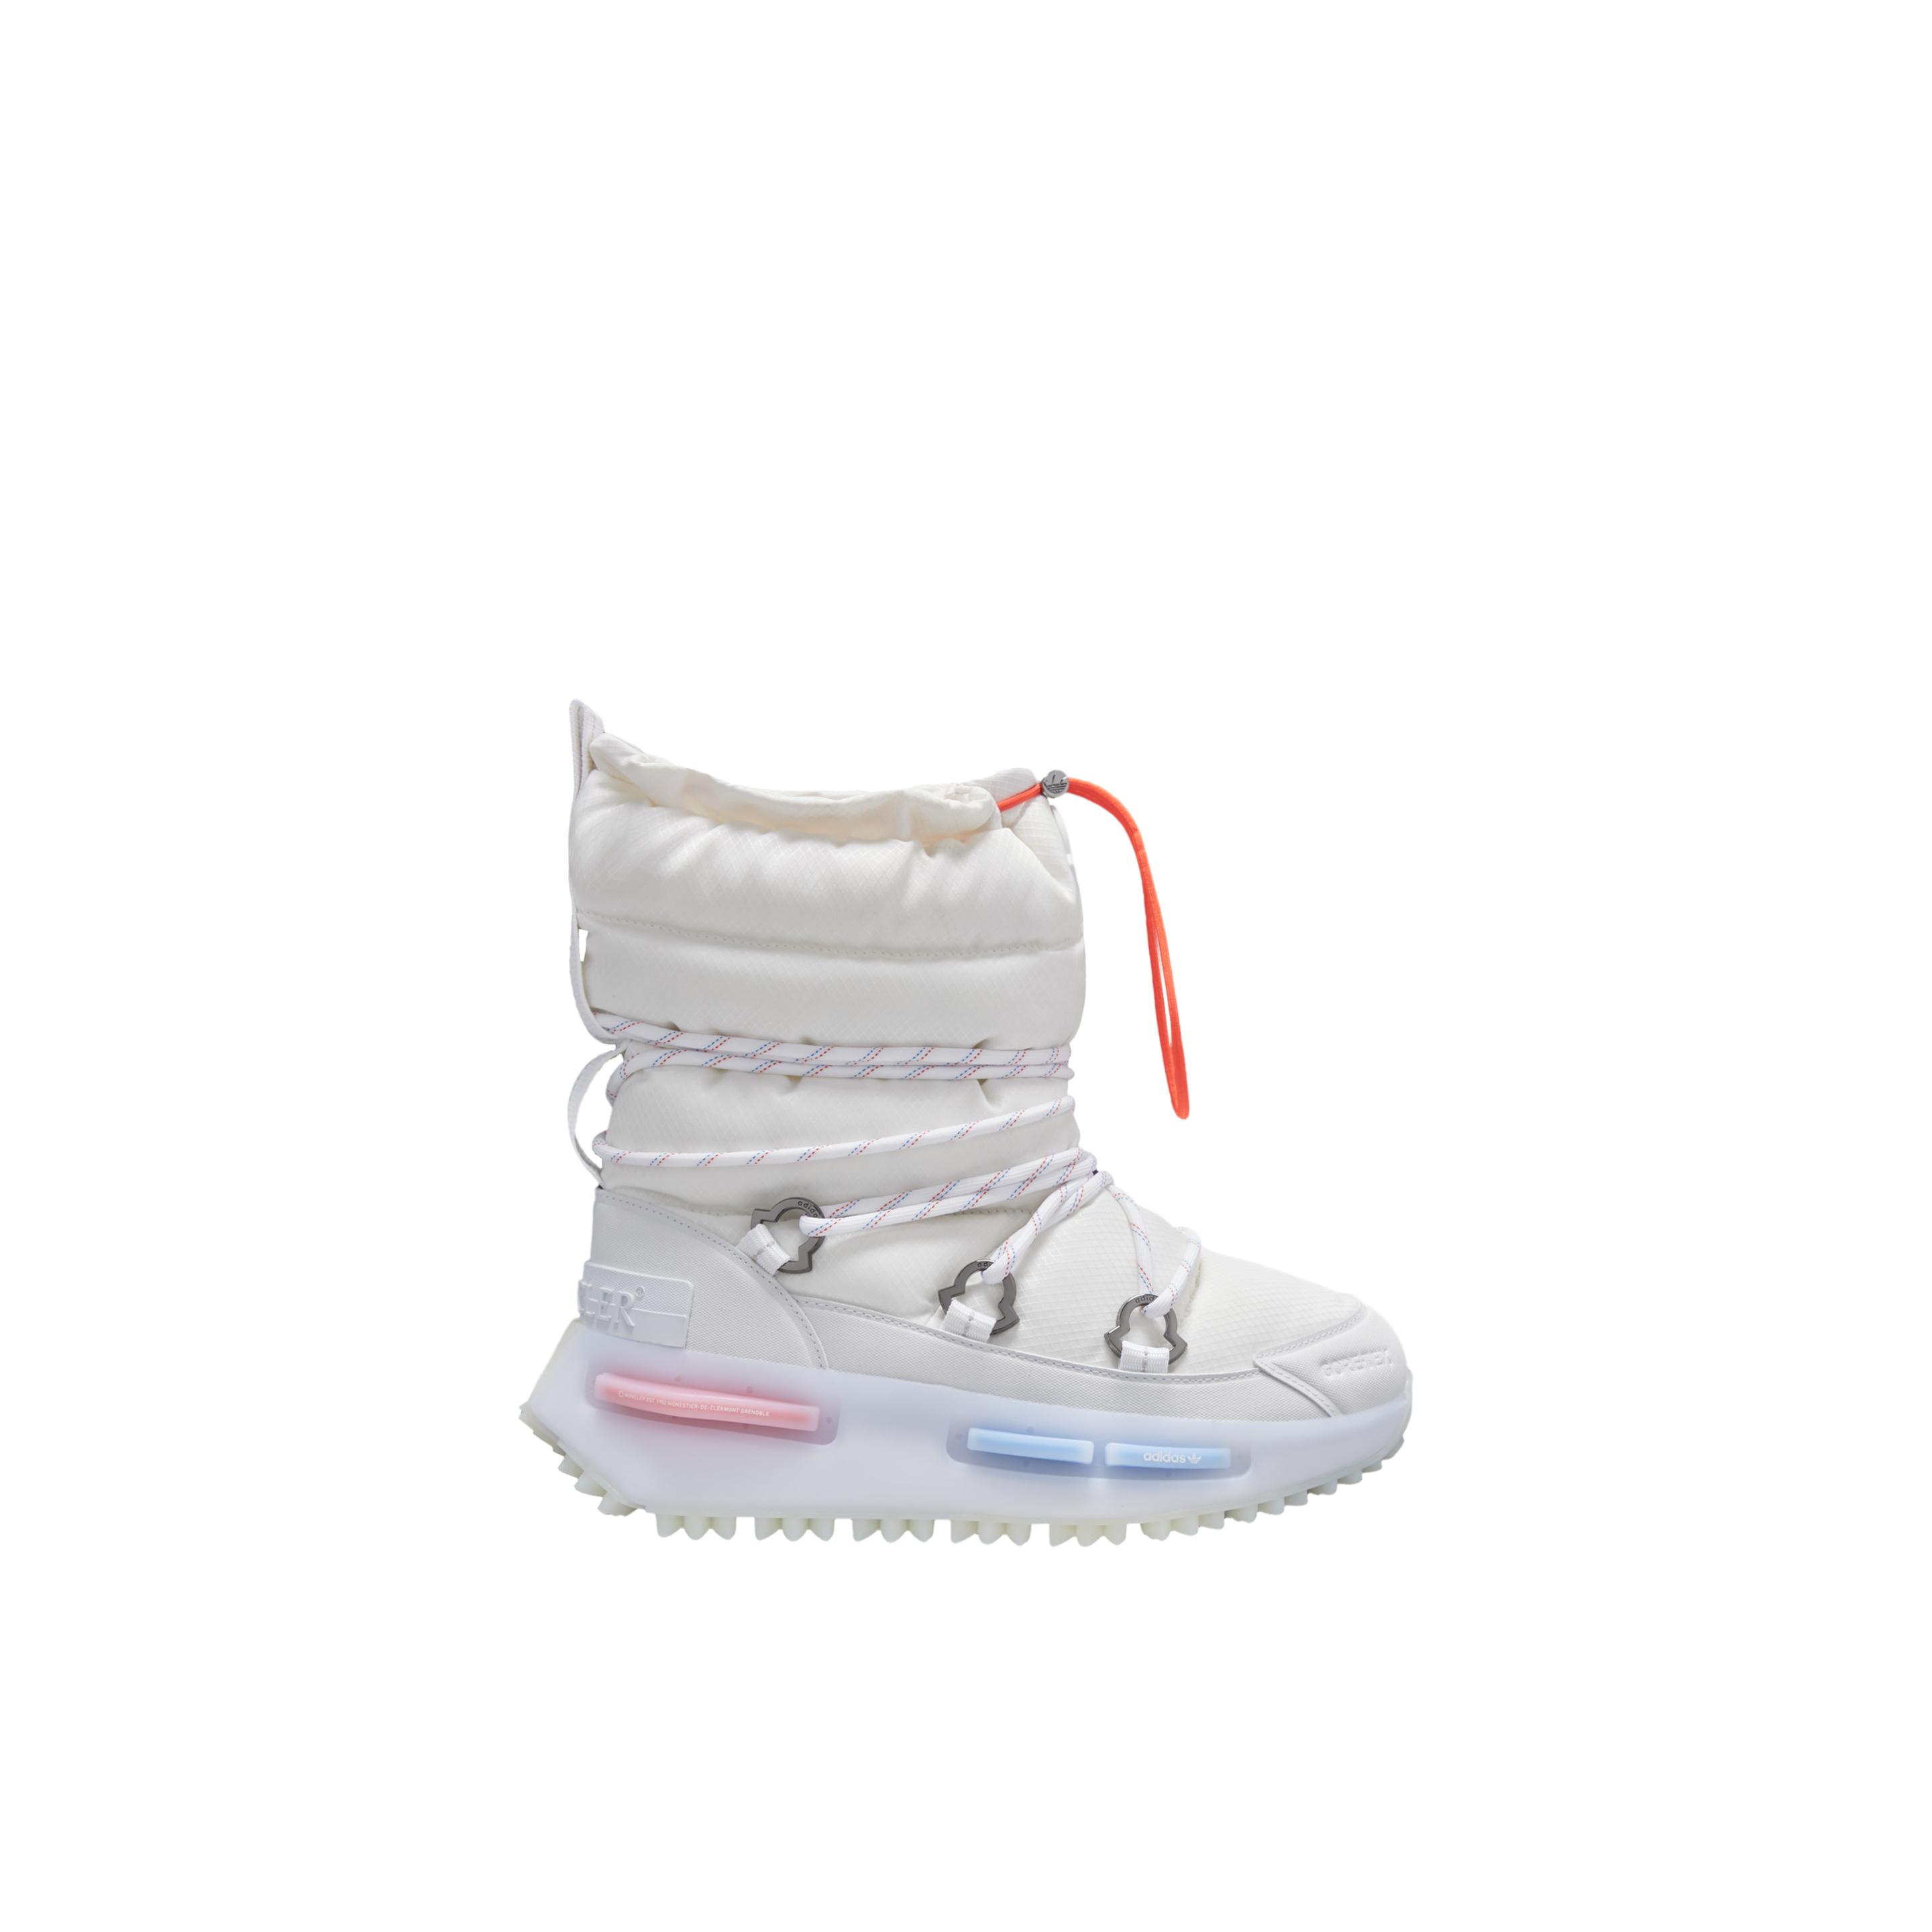 Moncler X Adidas Originals Nmd Mid Boots in White | Lyst UK